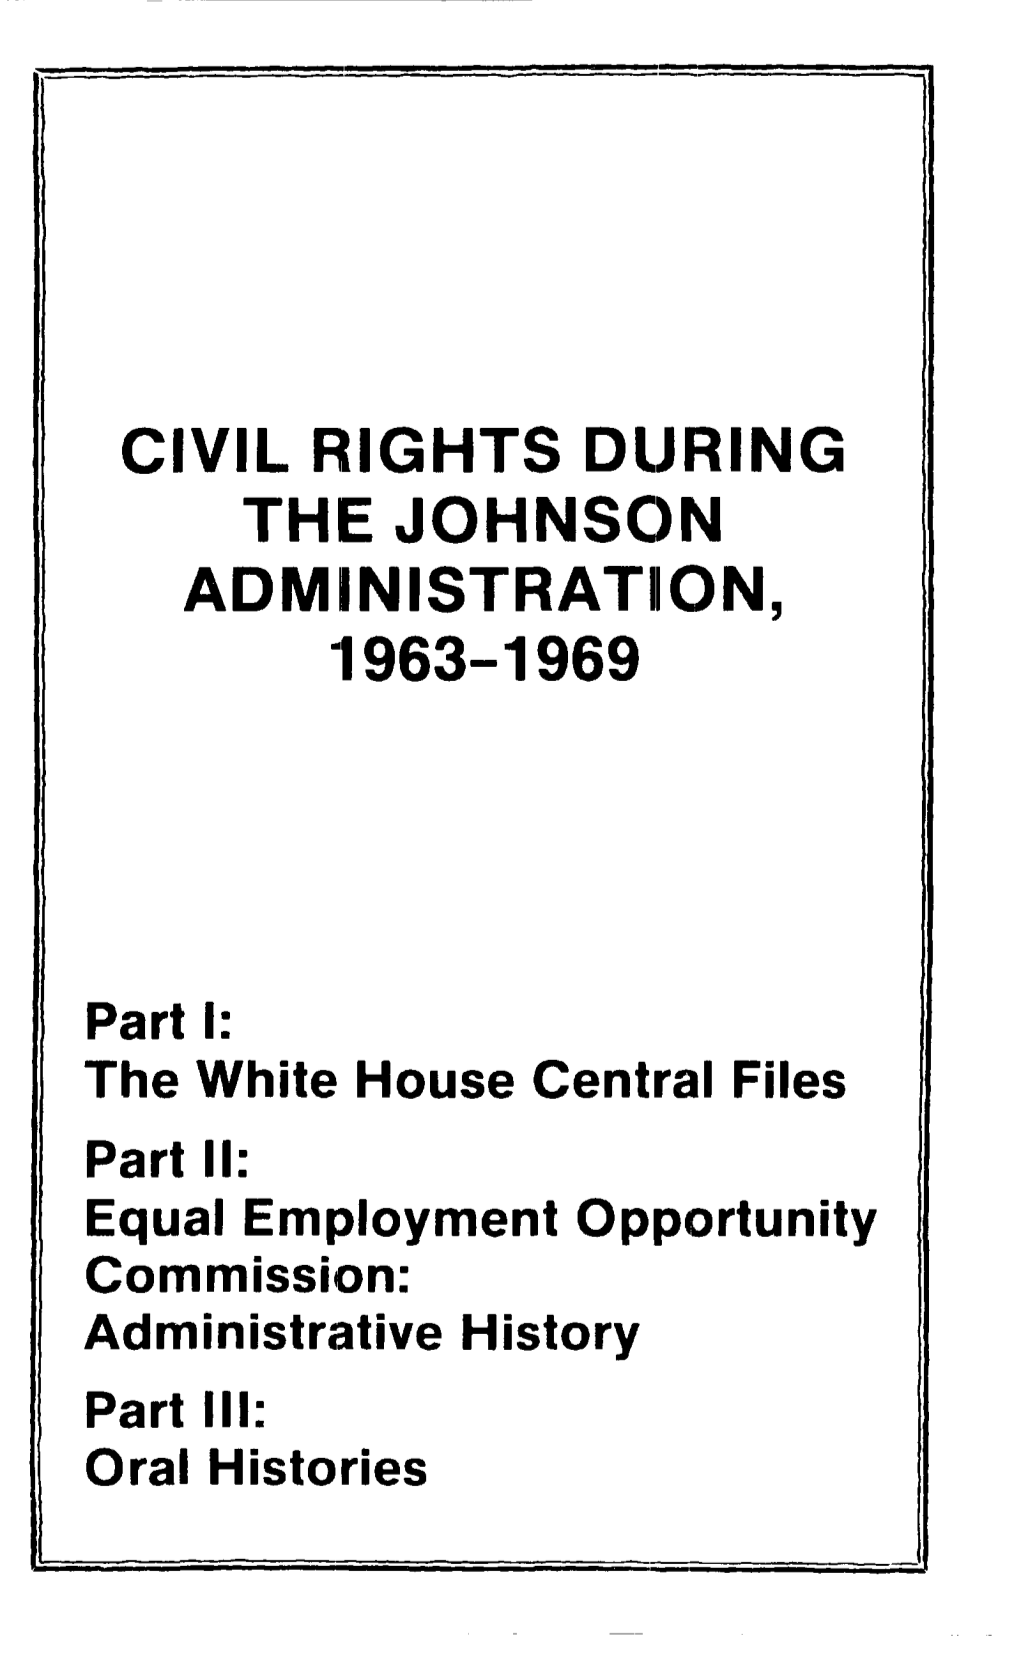 Civil Rights During the Johnson 1963-1969